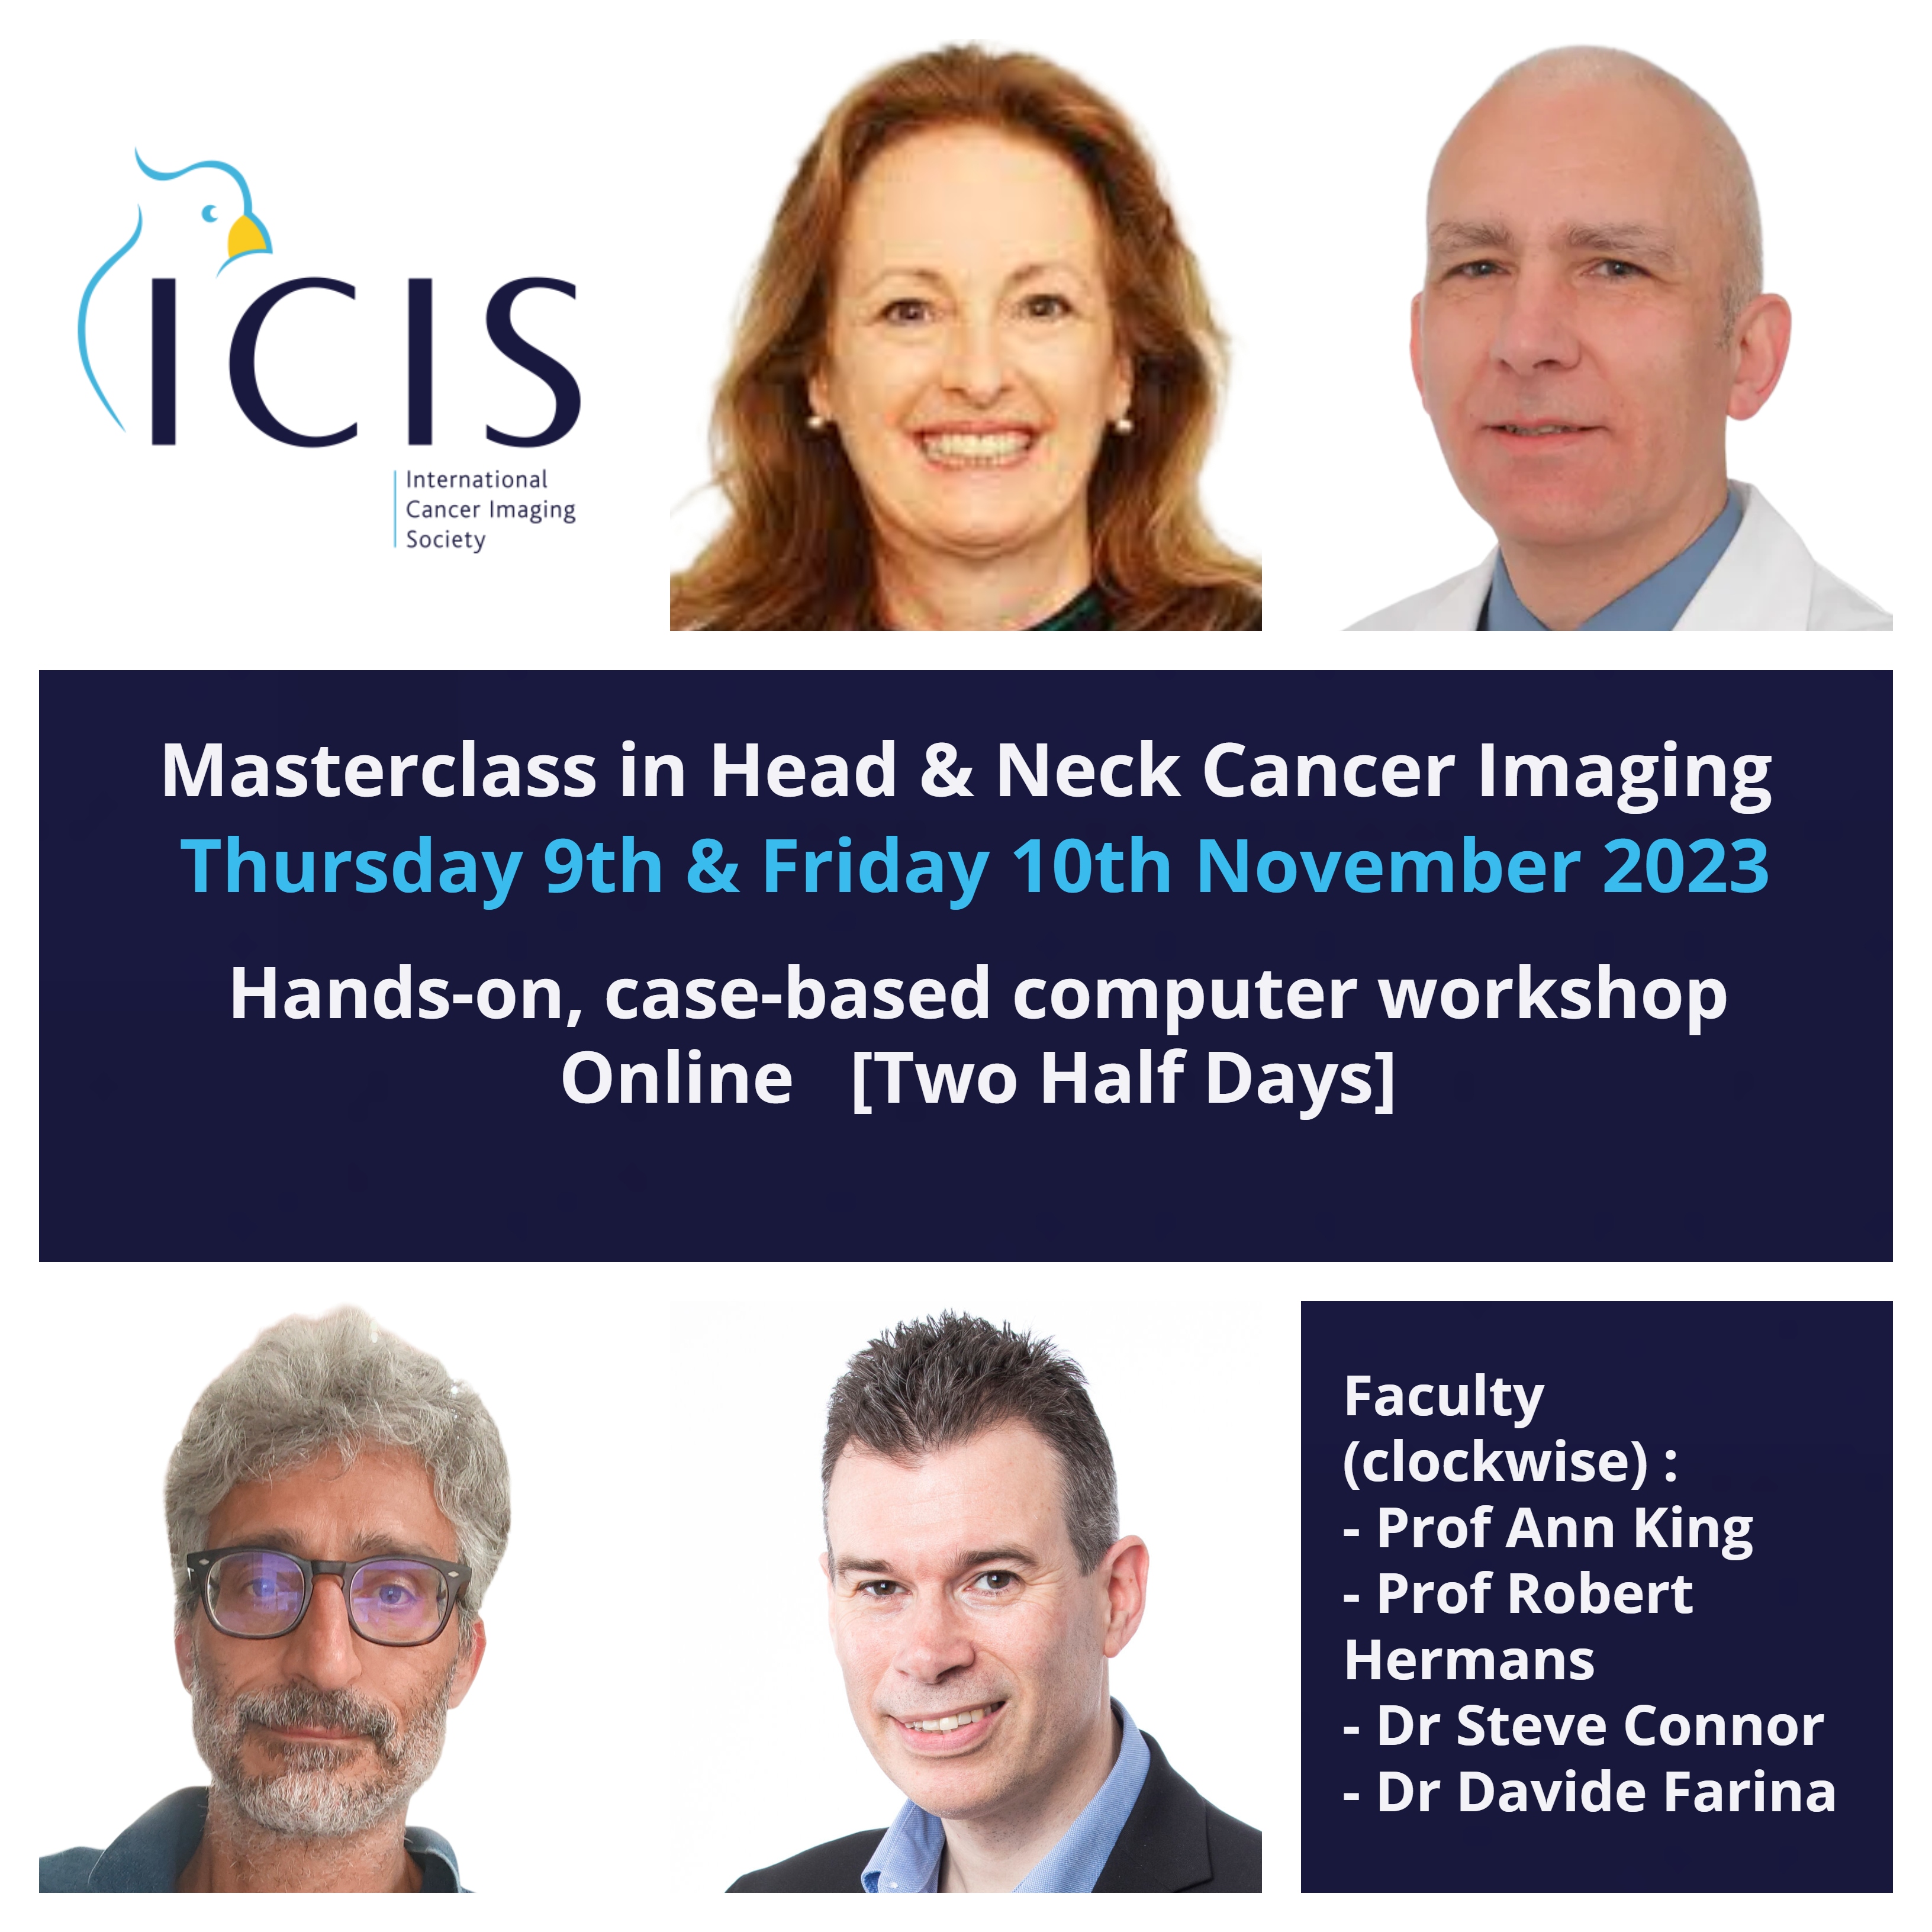 Masterclass in Head & Neck Cancer Imaging